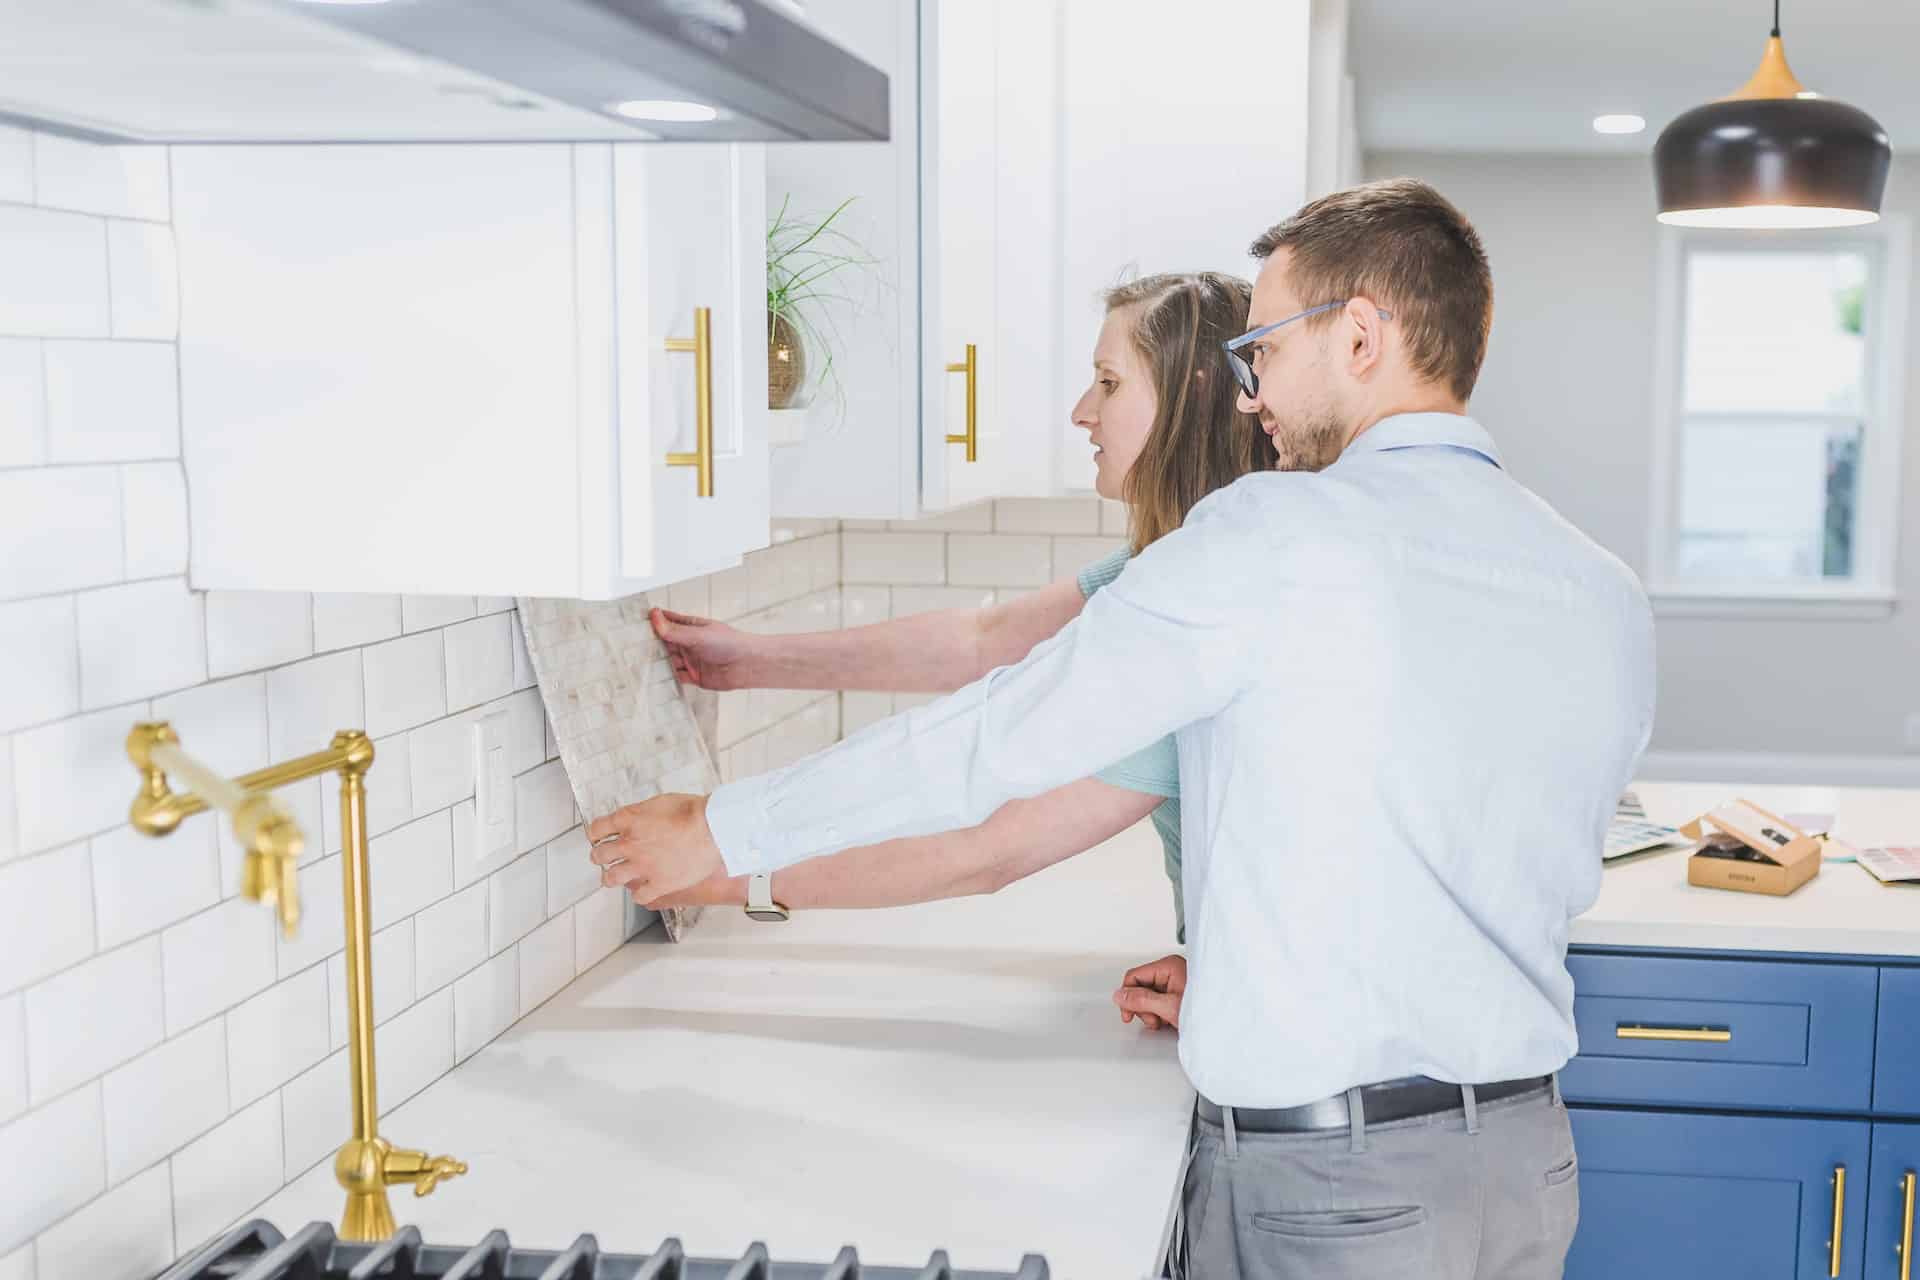 How to Choose The Perfect Backsplash - Great Lakes Granite & Marble